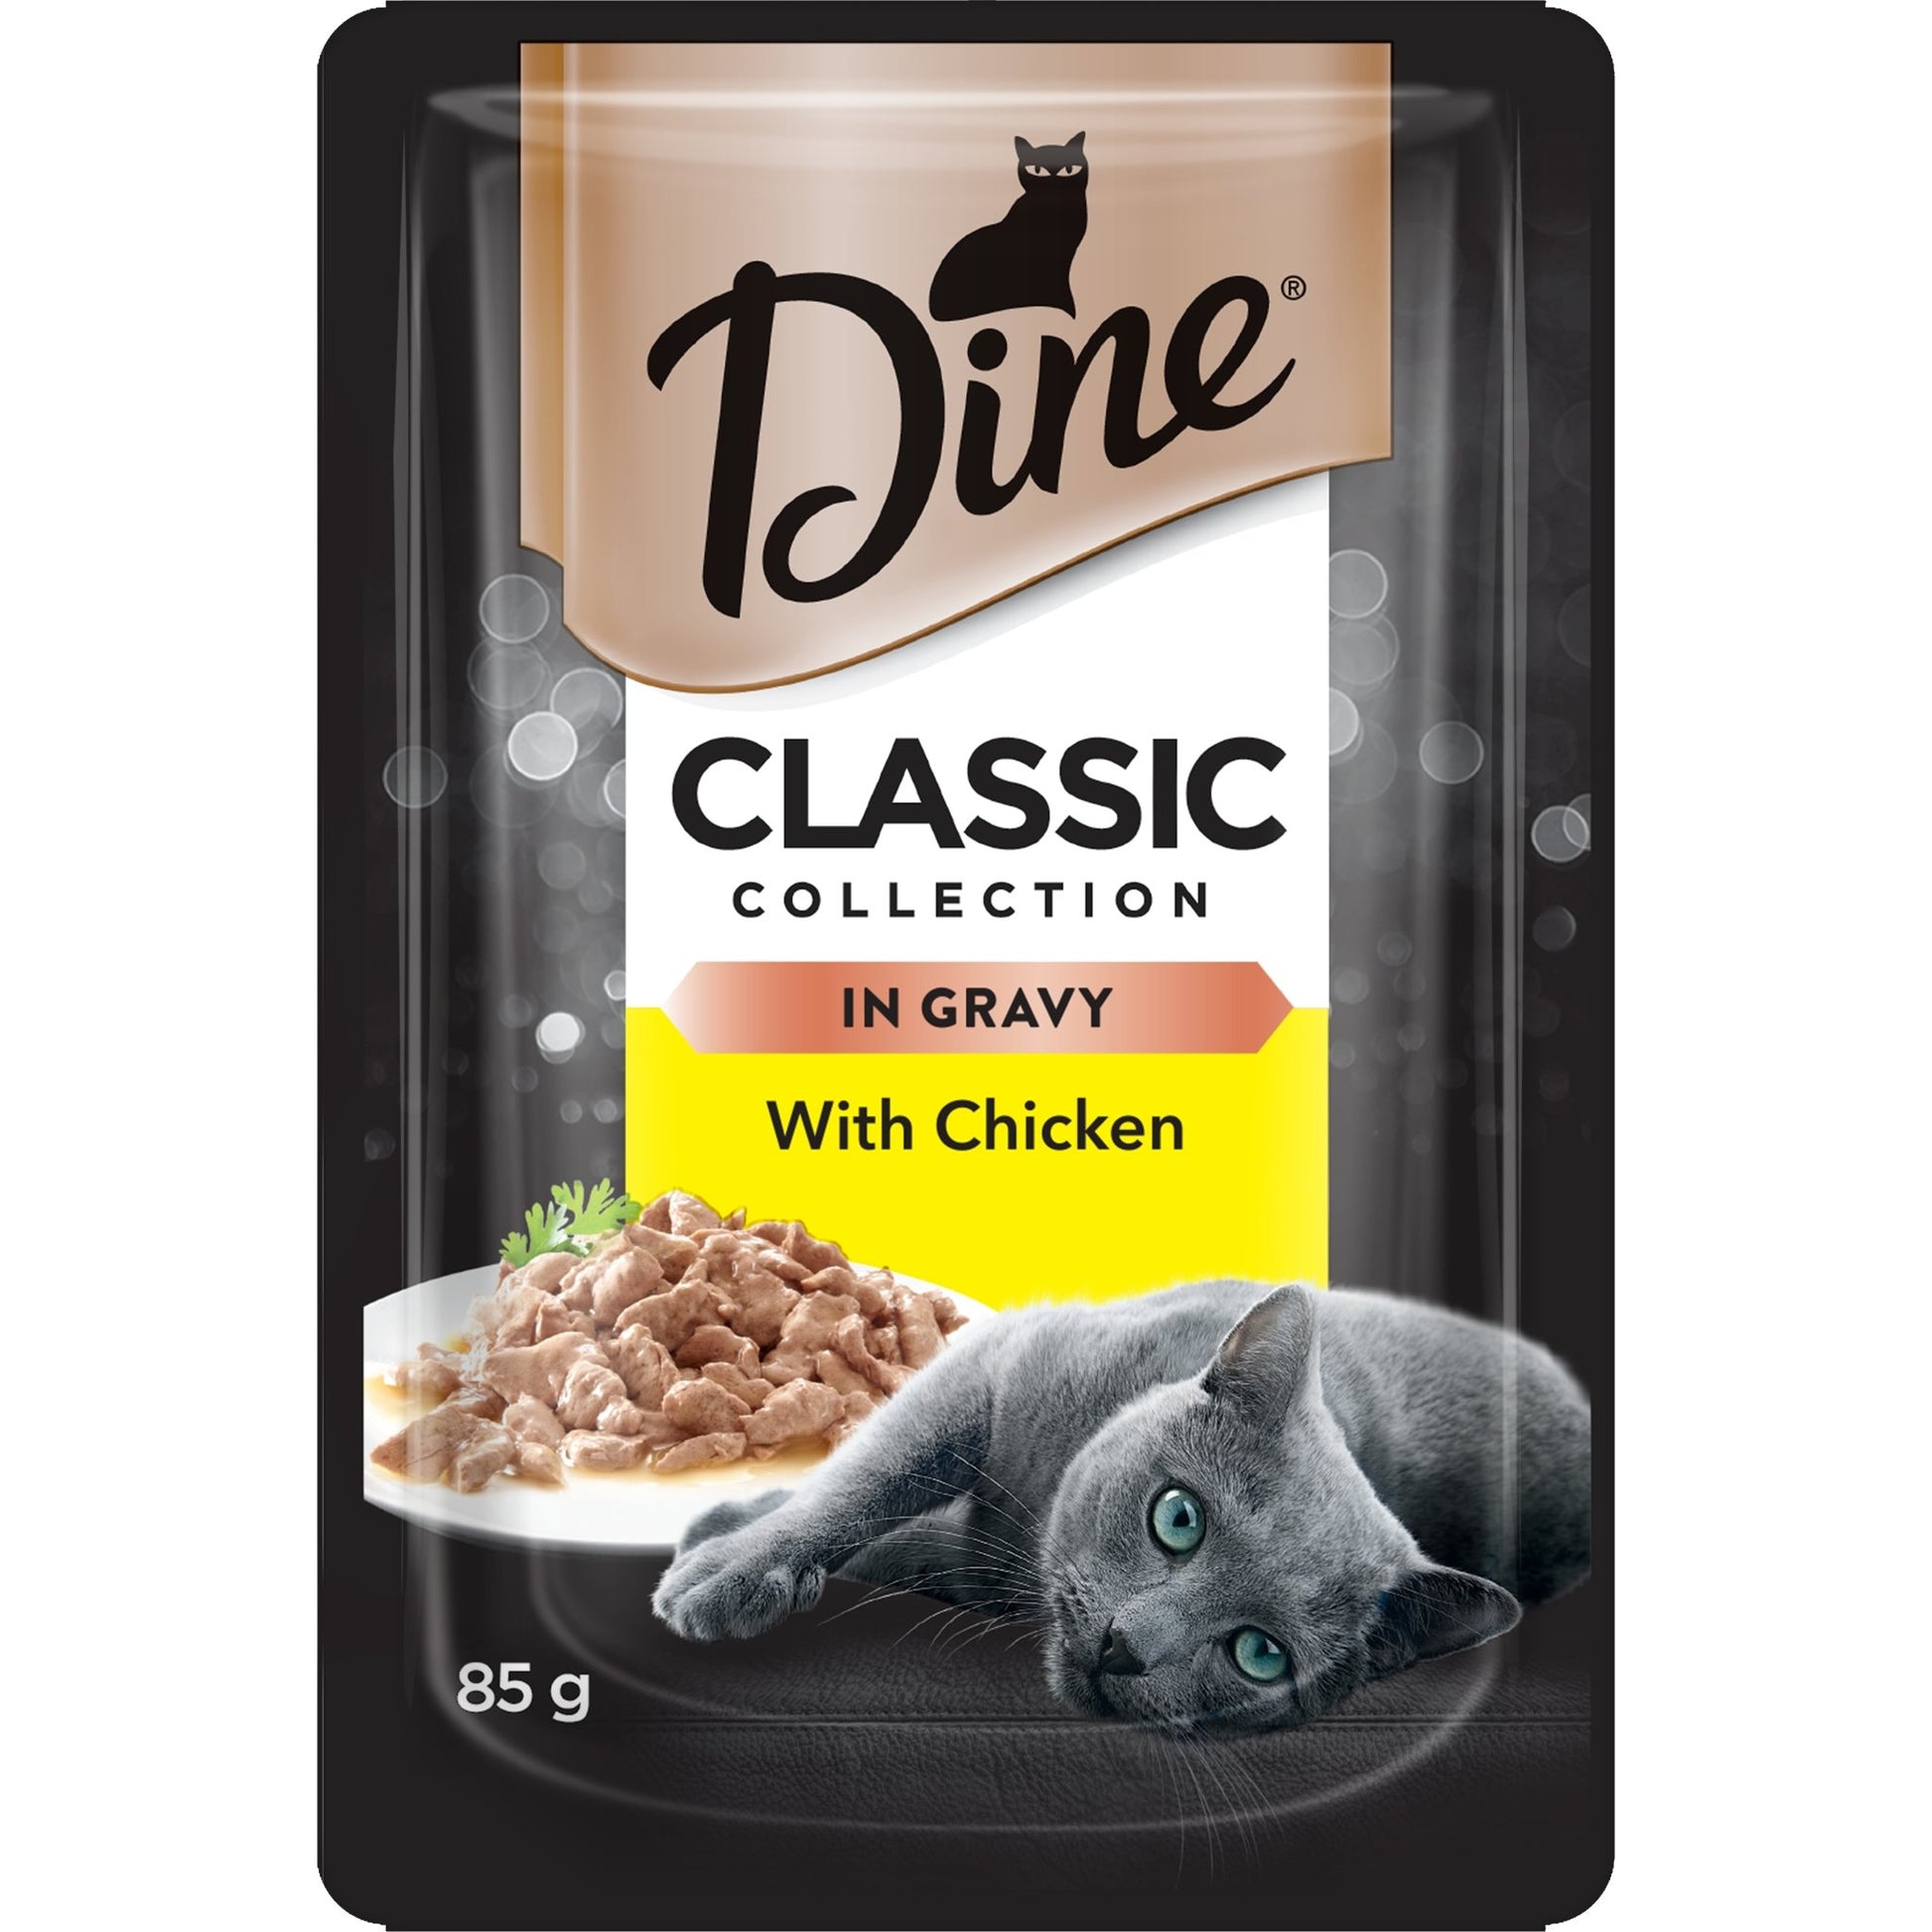 Dine Classic Collection Gravy with Chicken - Woonona Petfood & Produce